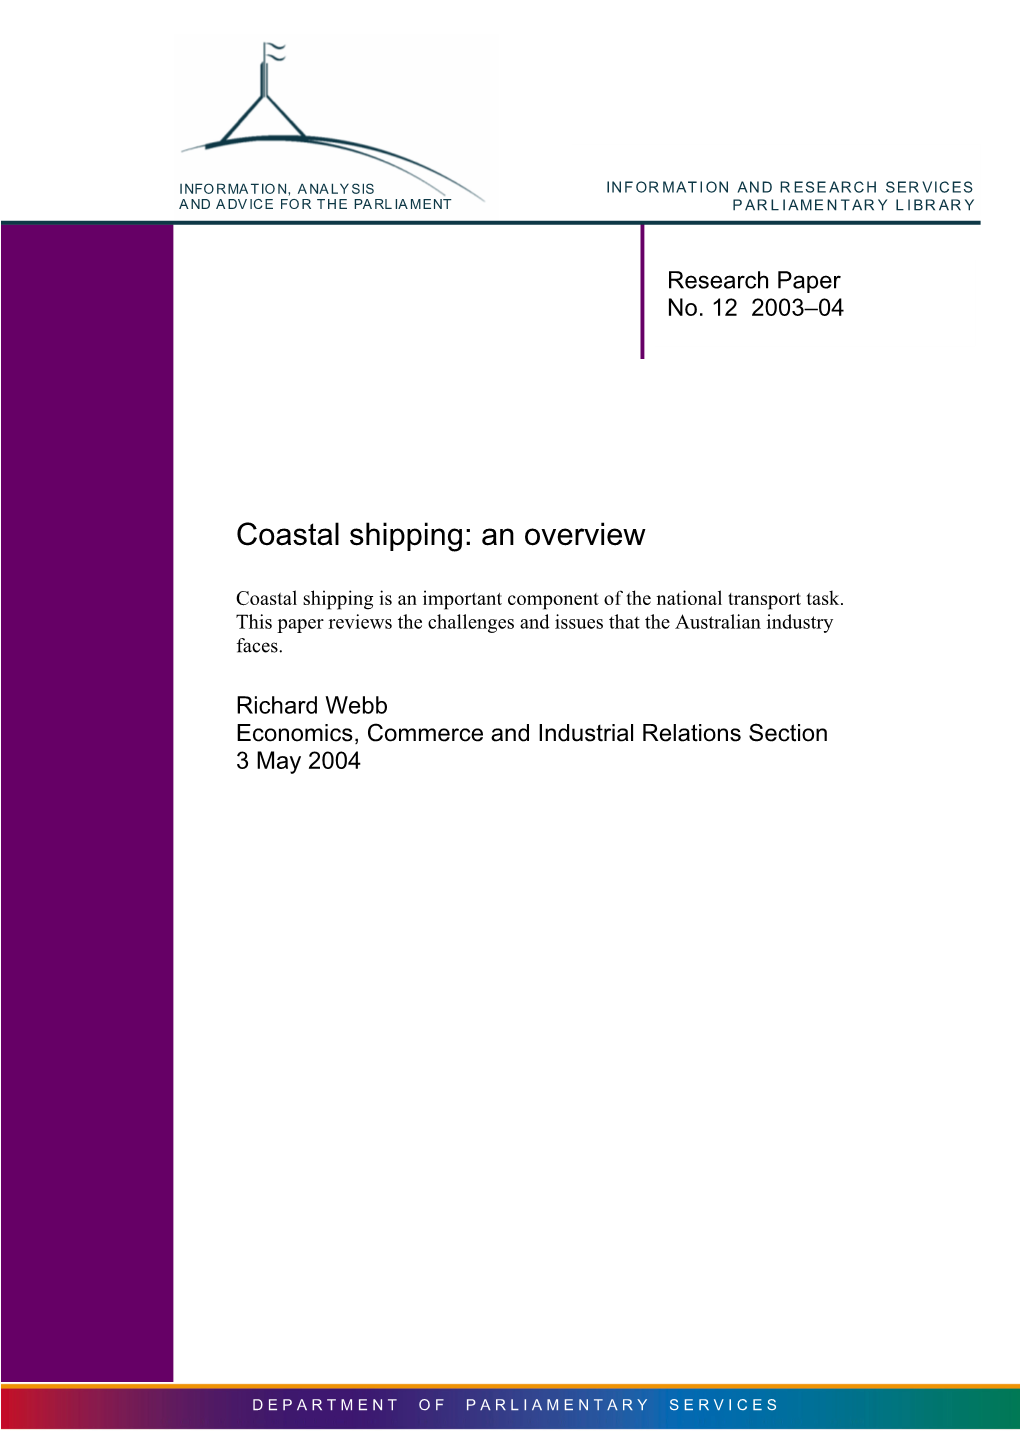 Coastal Shipping: an Overview